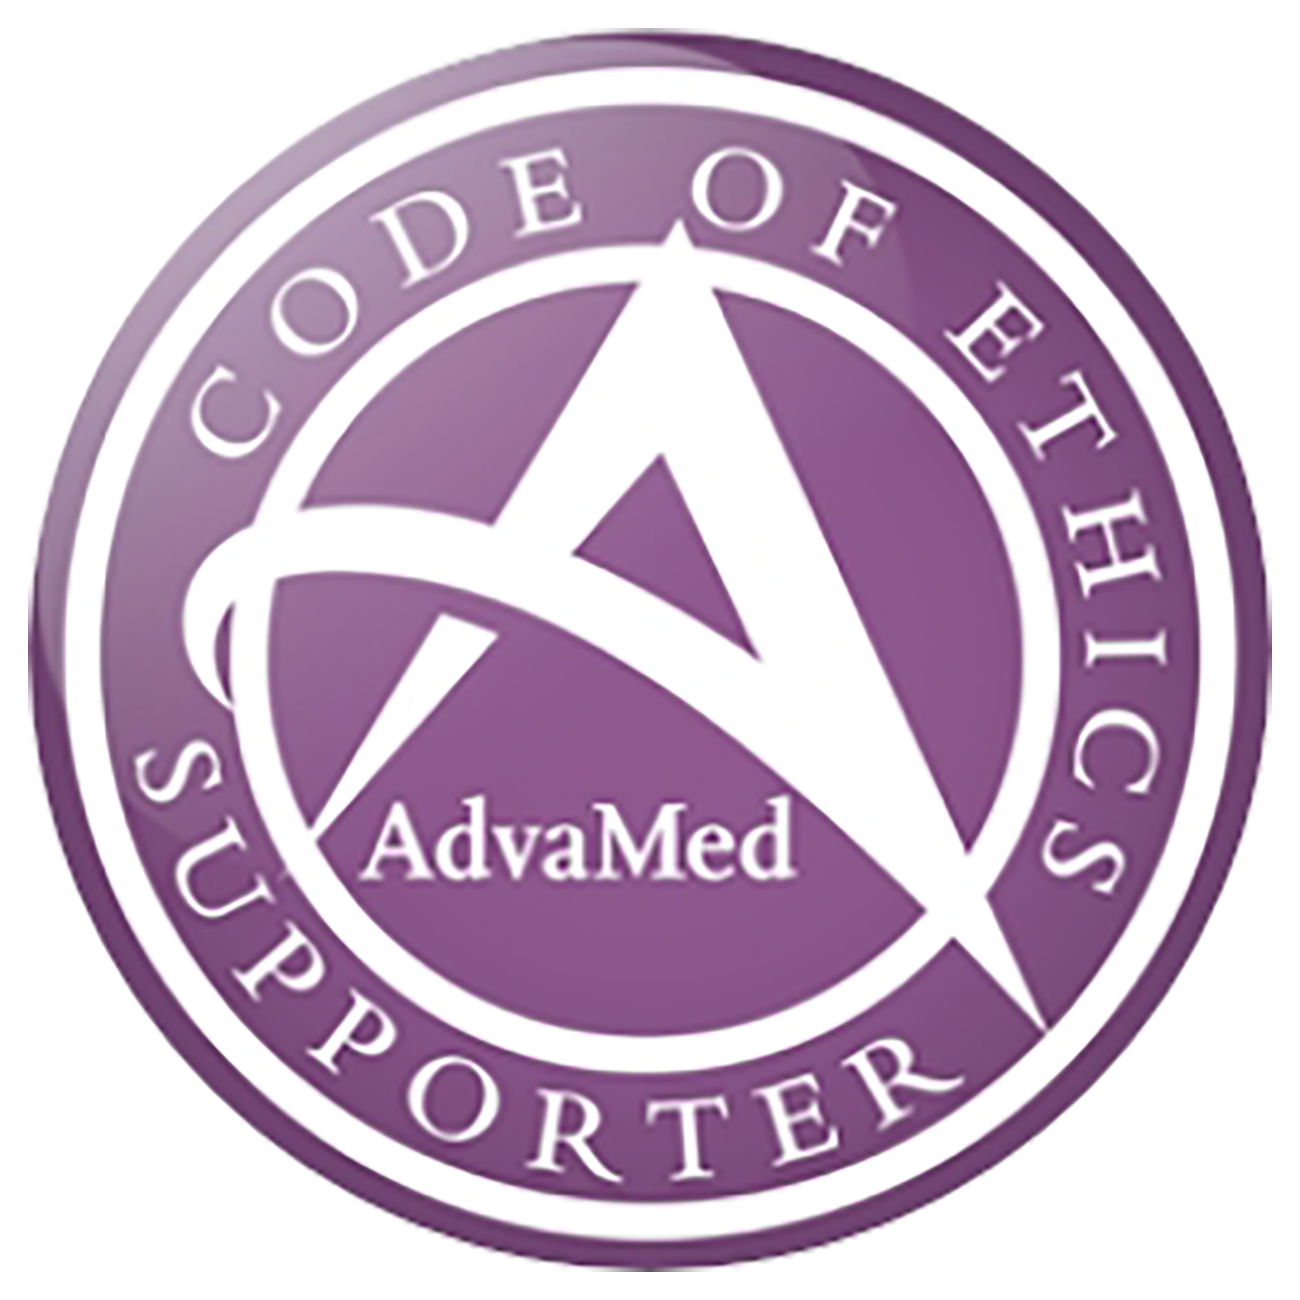 Code of Ethics Supporter